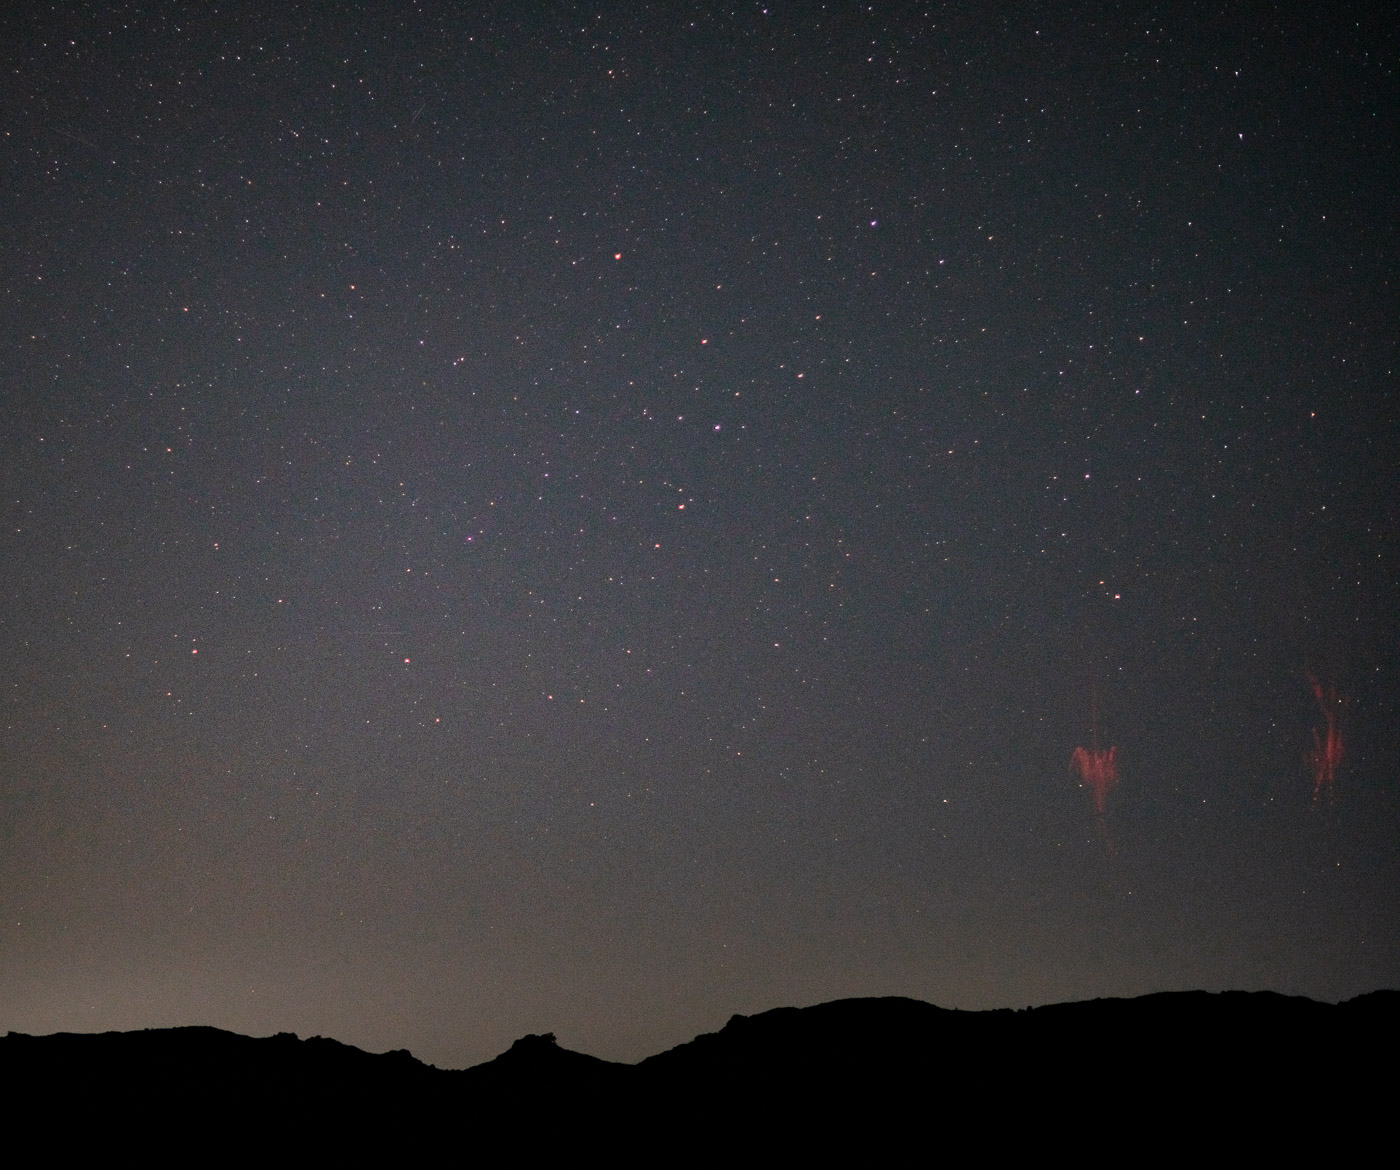 Sprites or sprite lightning. A red burst, like small fireworks, appear in the night sky.